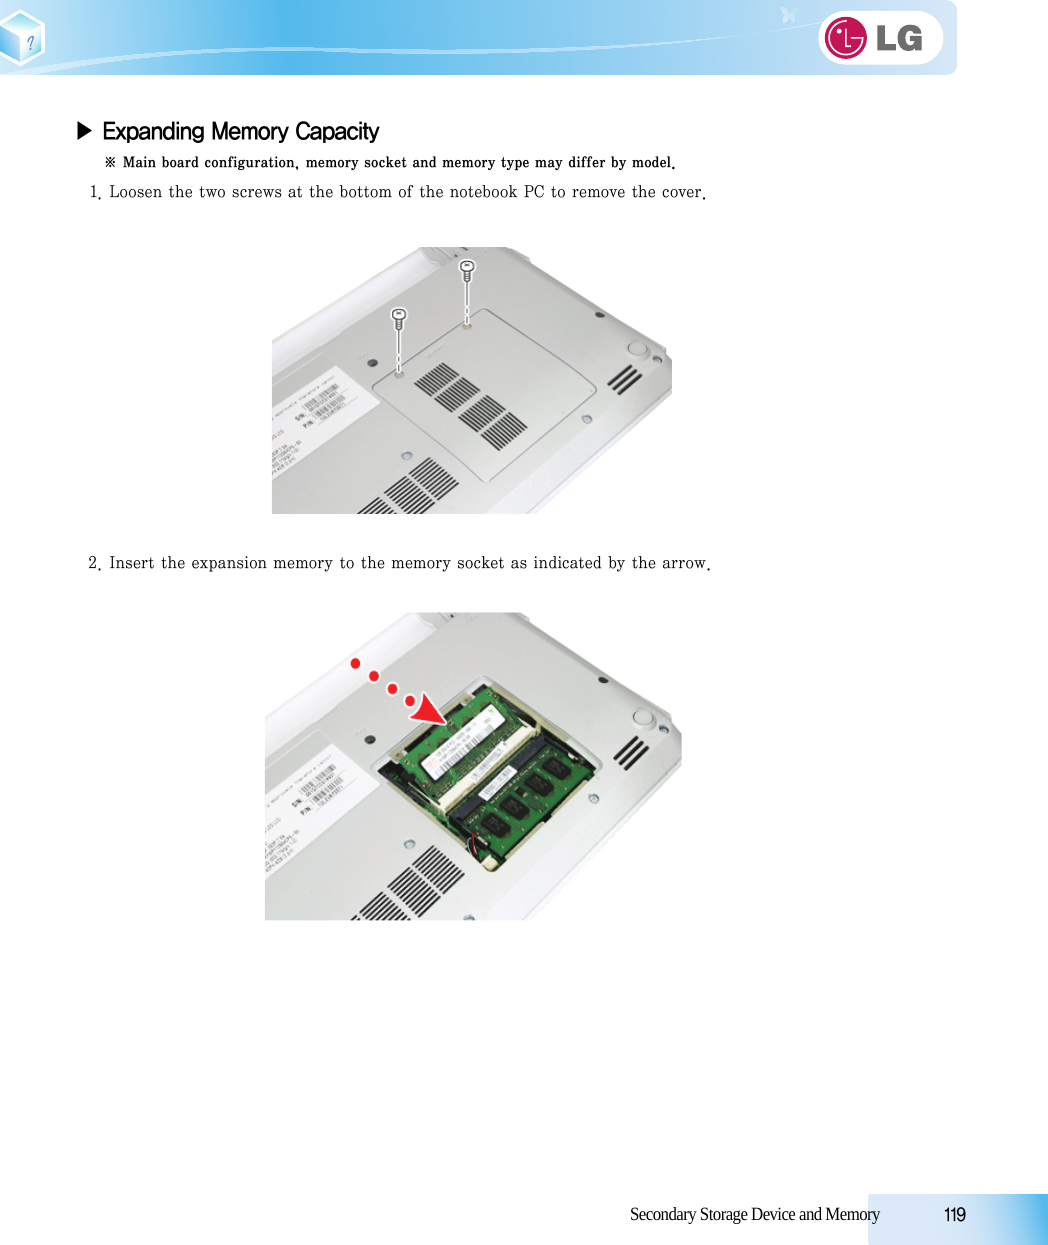 Secondary Storage Device and Memory            119▶ Expanding Memory Capacity※ Main board configuration, memory socket and memory type may differ by model.1. Loosen the two screws at the bottom of the notebook PC to remove the cover.2. Insert the expansion memory to the memory socket as indicated by the arrow.